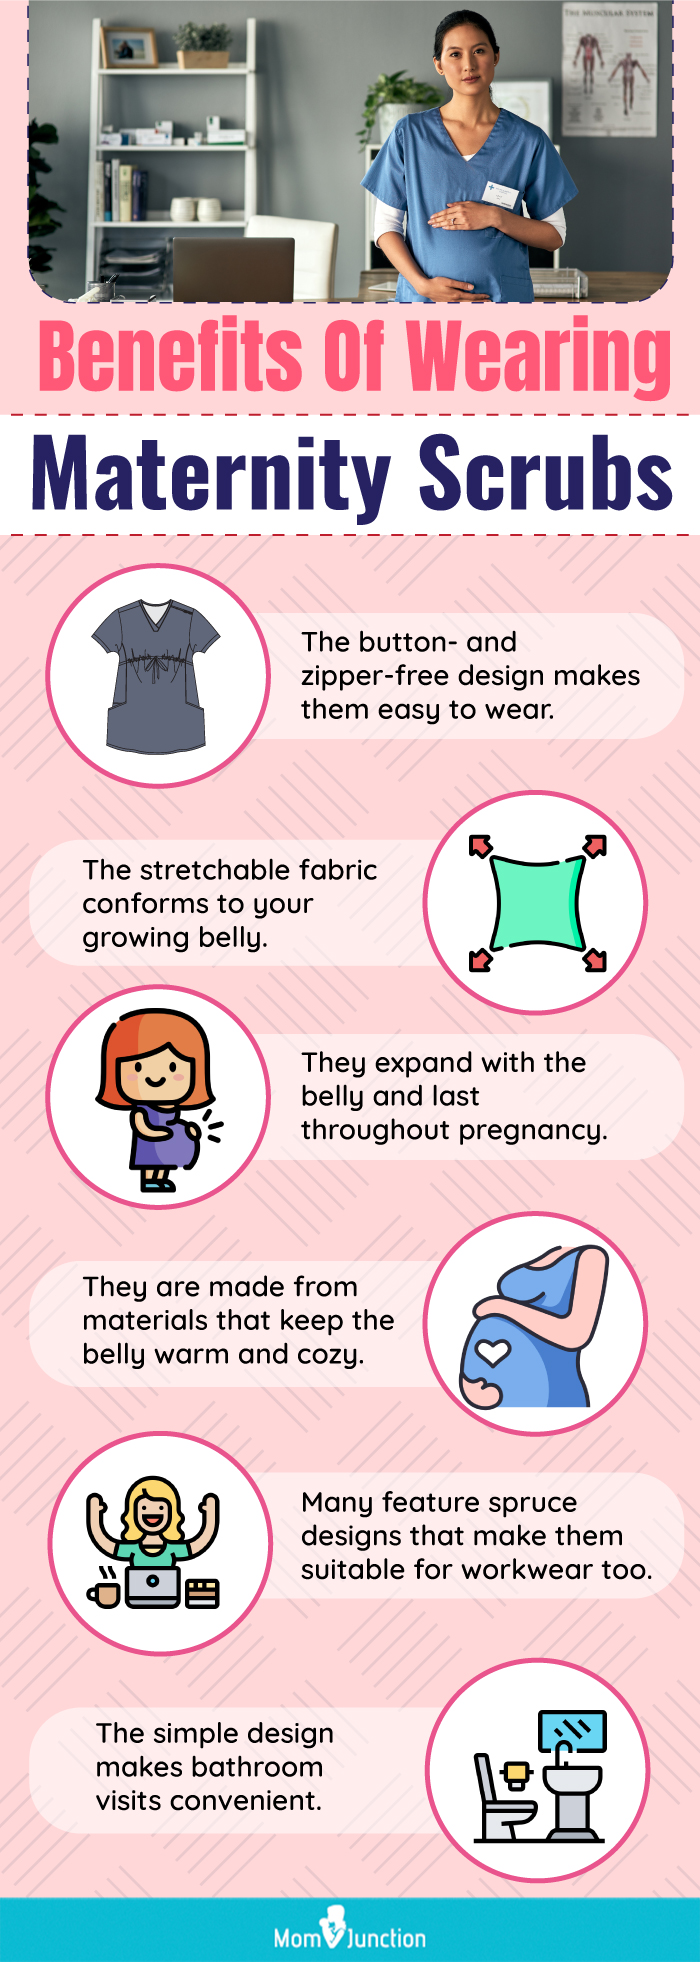 Benefits Of Wearing Maternity Scrubs (infographic)